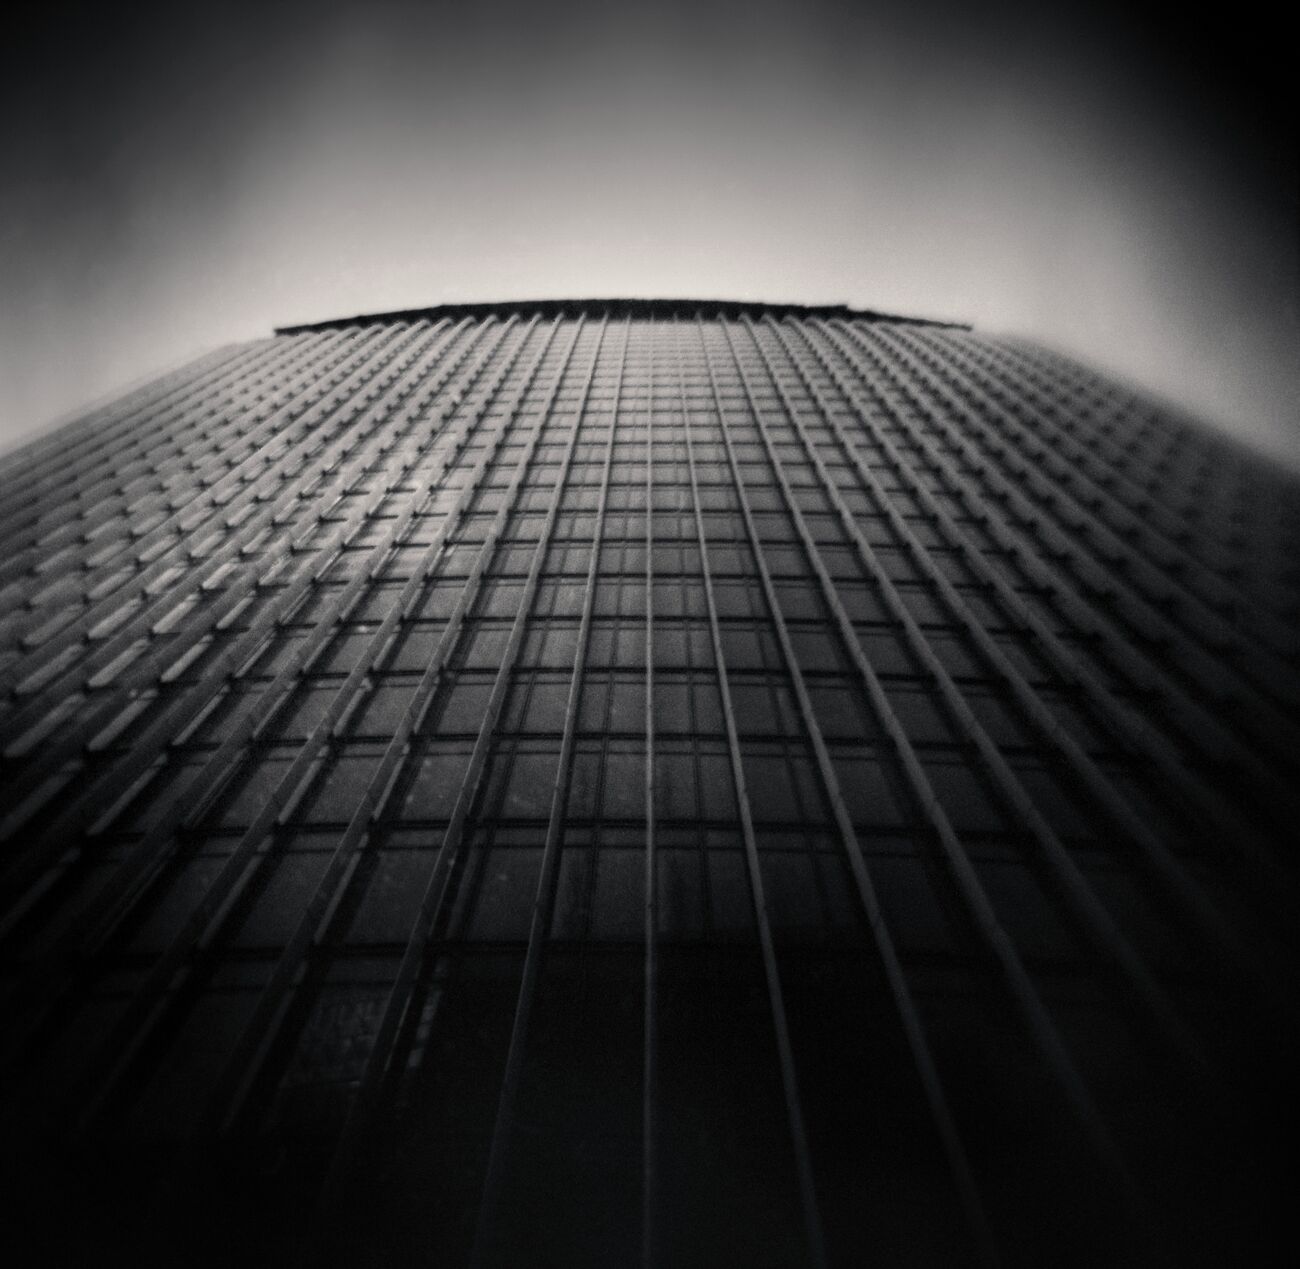 20 Fenchurch Street (The Walkie-Talkie), The City, London, England. April 2014. Ref-1360 - Denis Olivier Art Photography